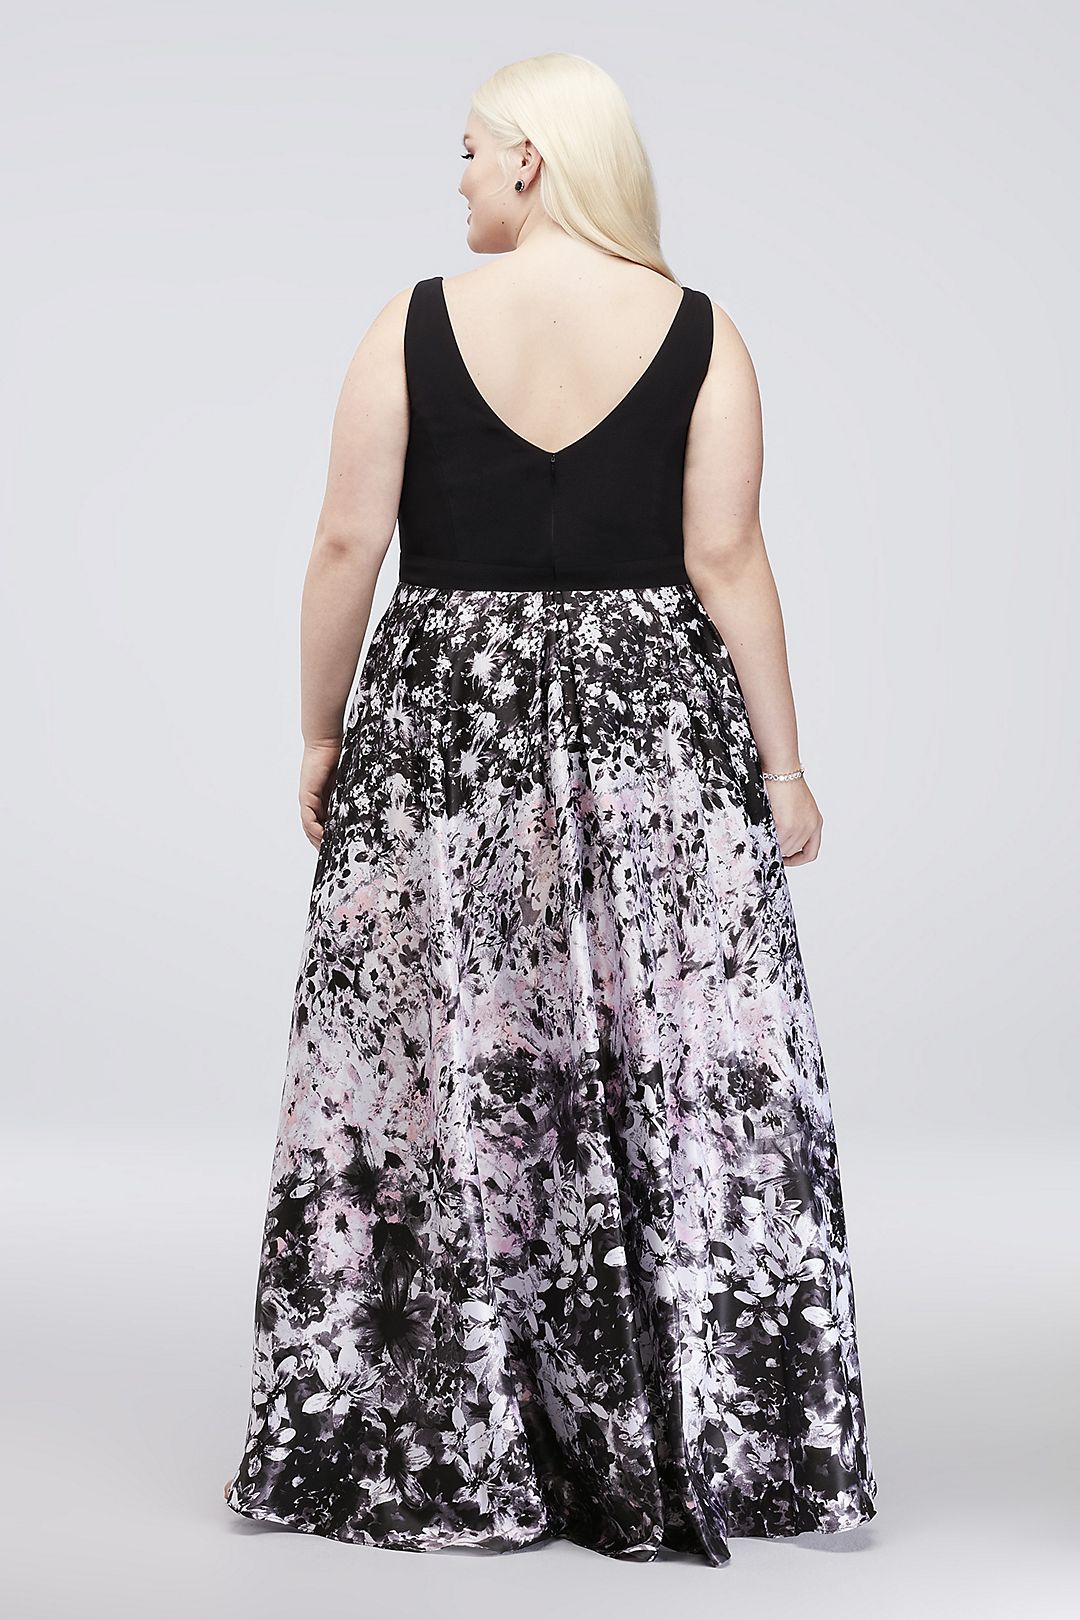 V-Neck Plus Size Ball Gown with Floral Print Skirt Image 2